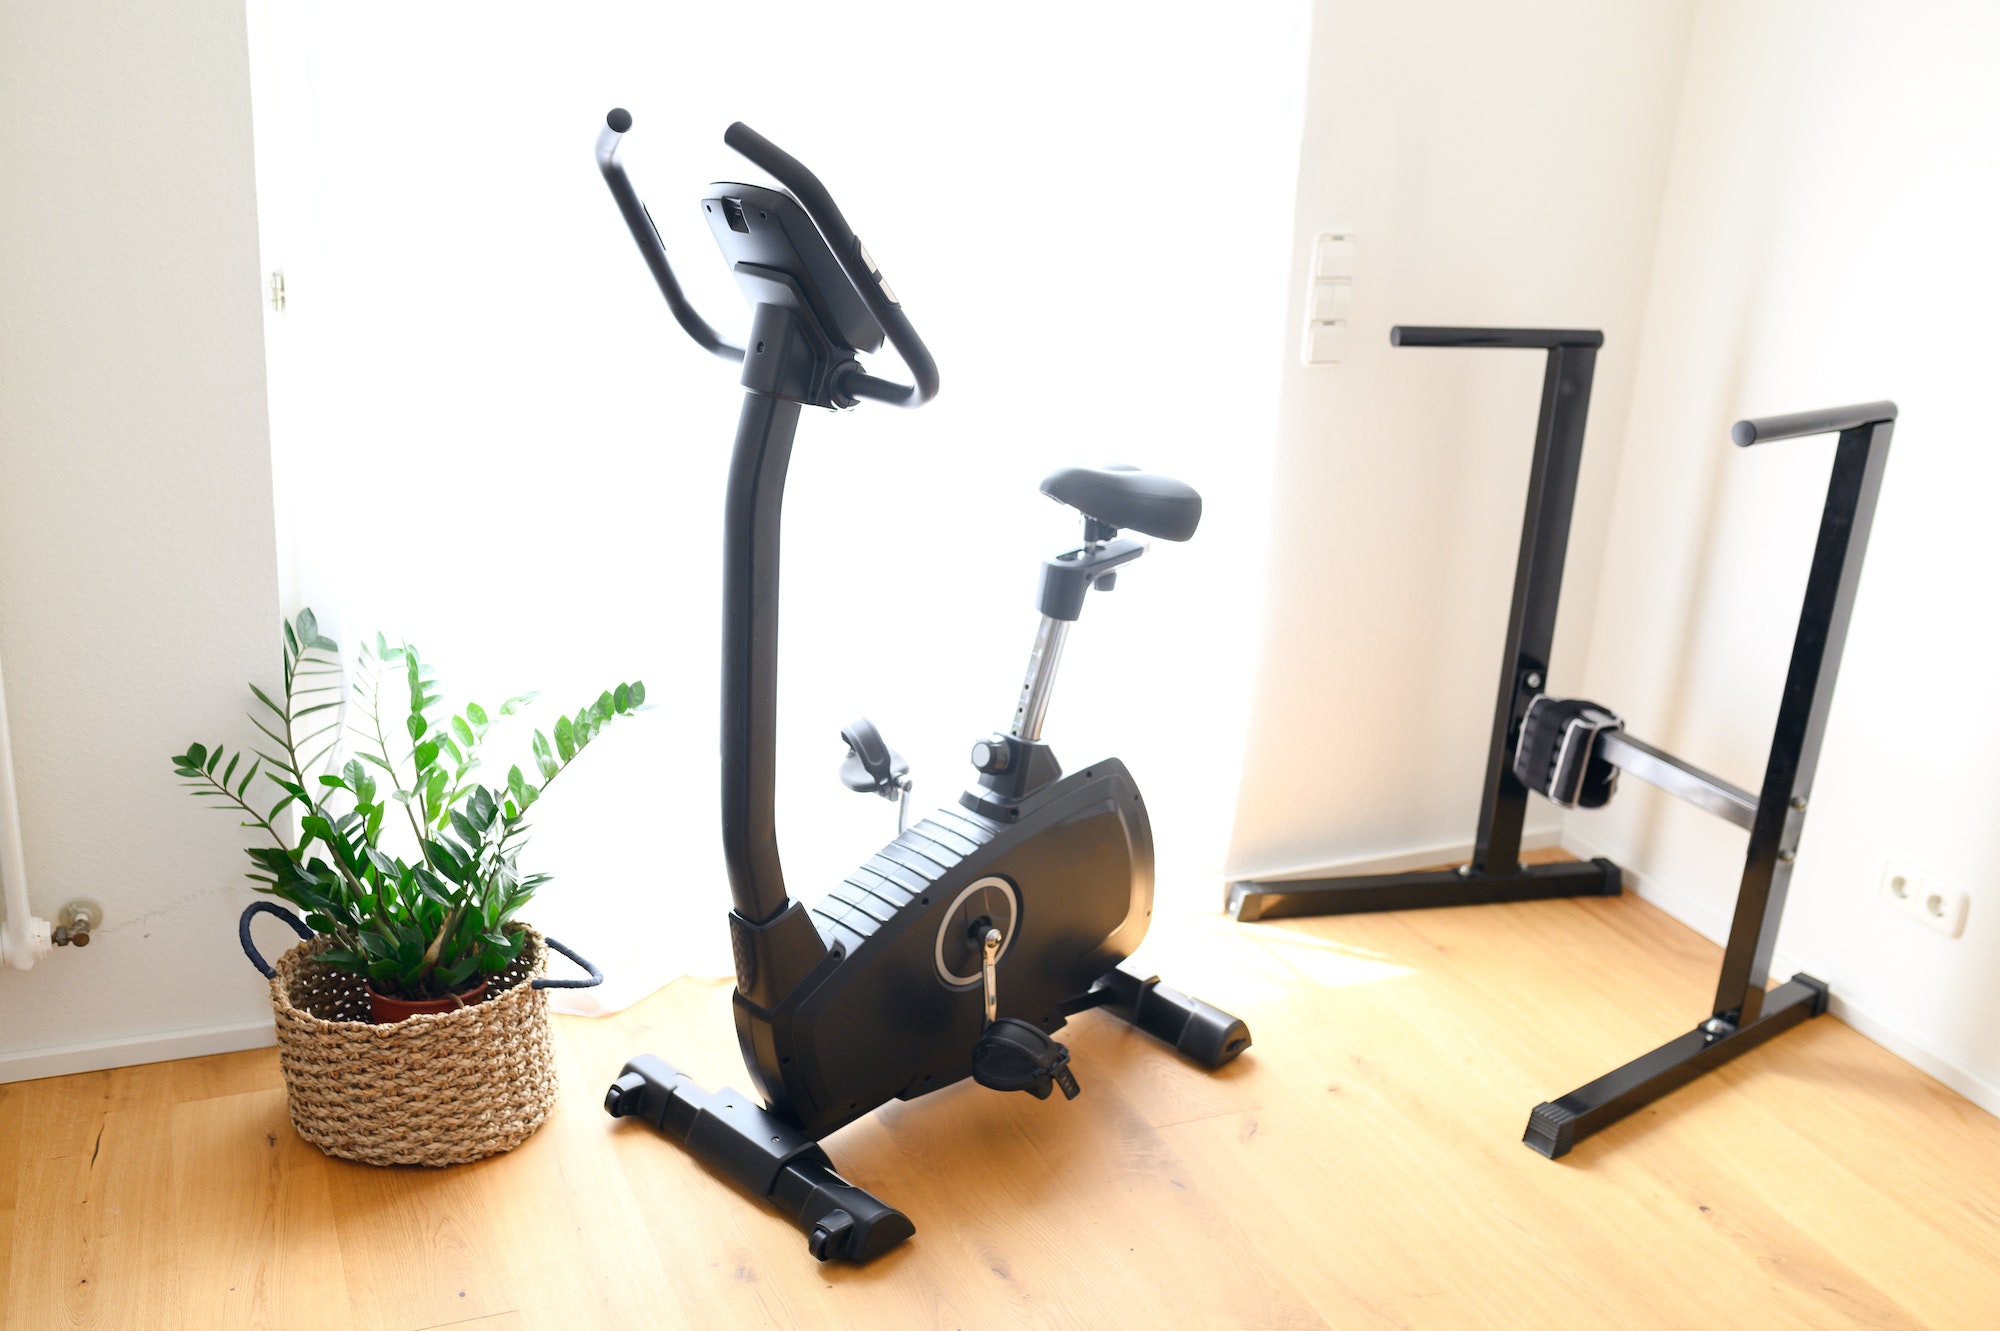 Room at home with sport equipment